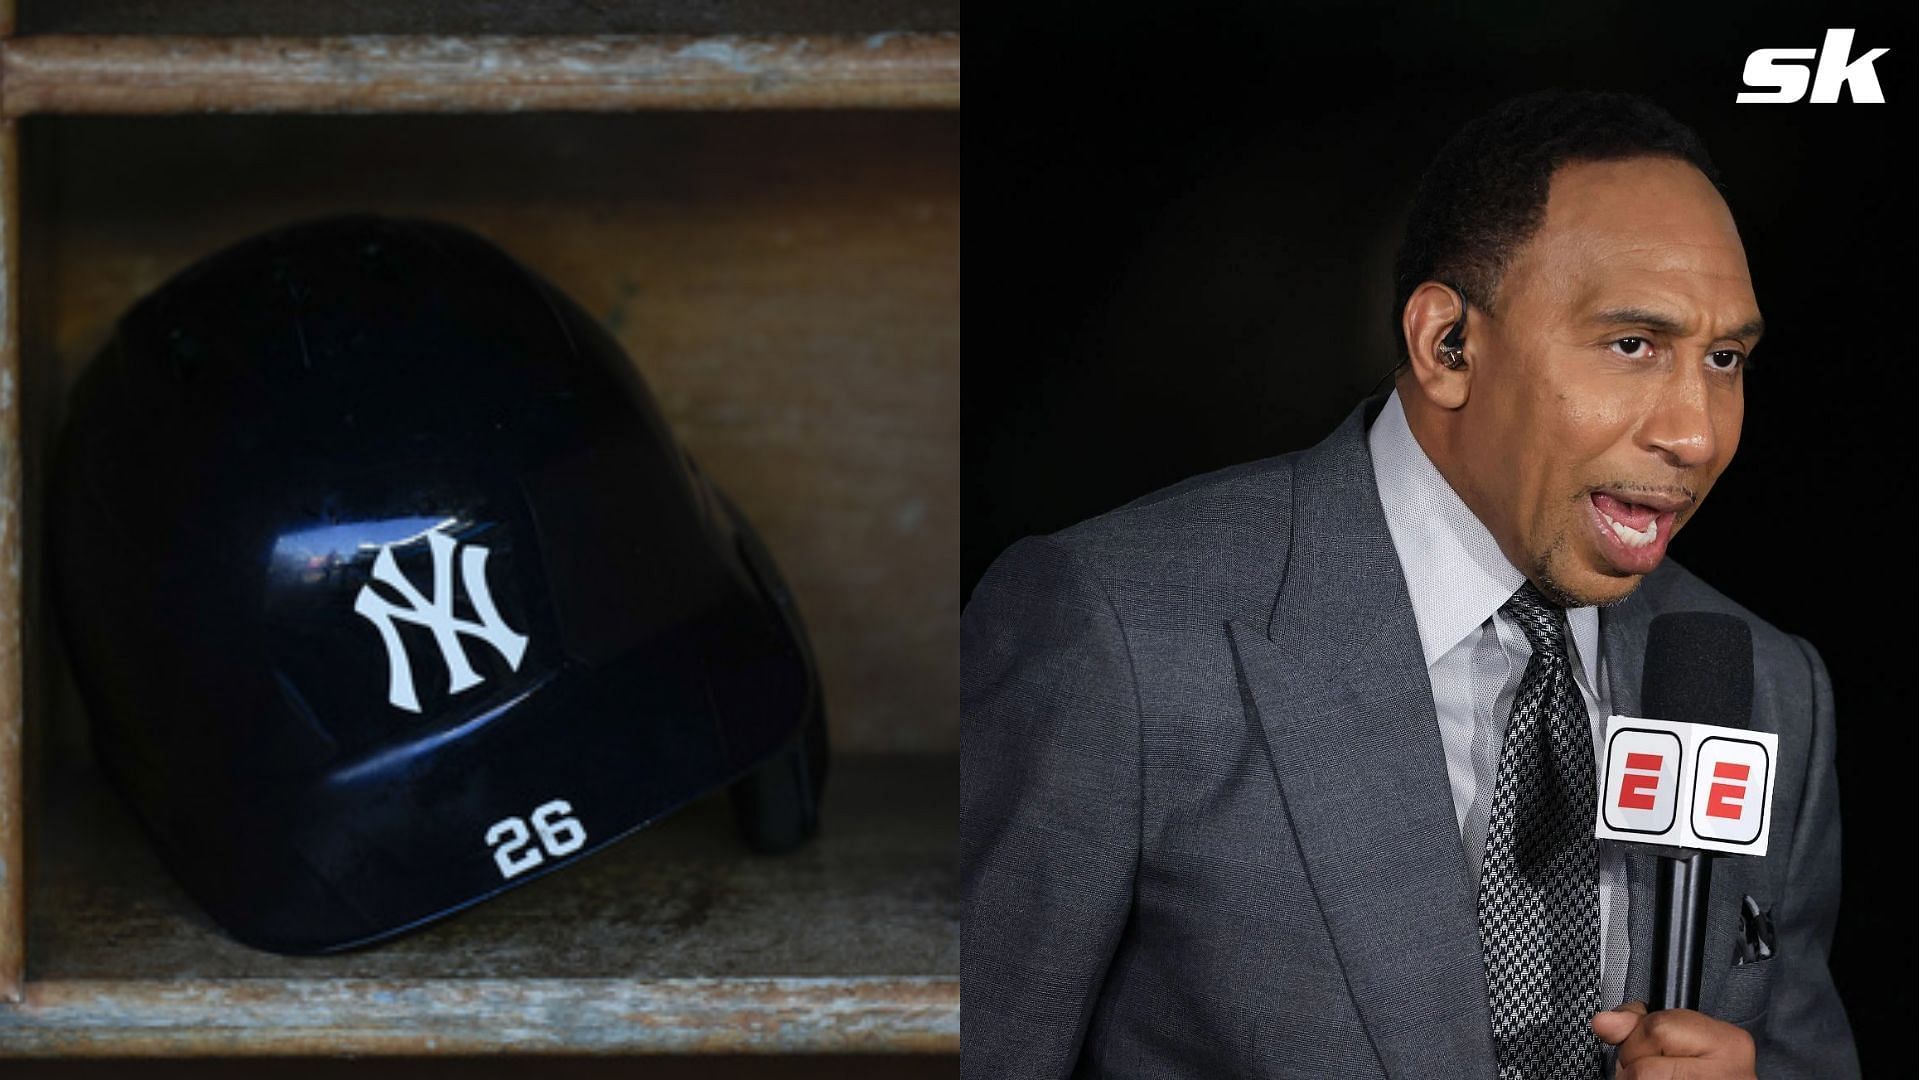 MLB fans rip Stephen A. Smith for butchering the first pitch at Yankee Stadium - 